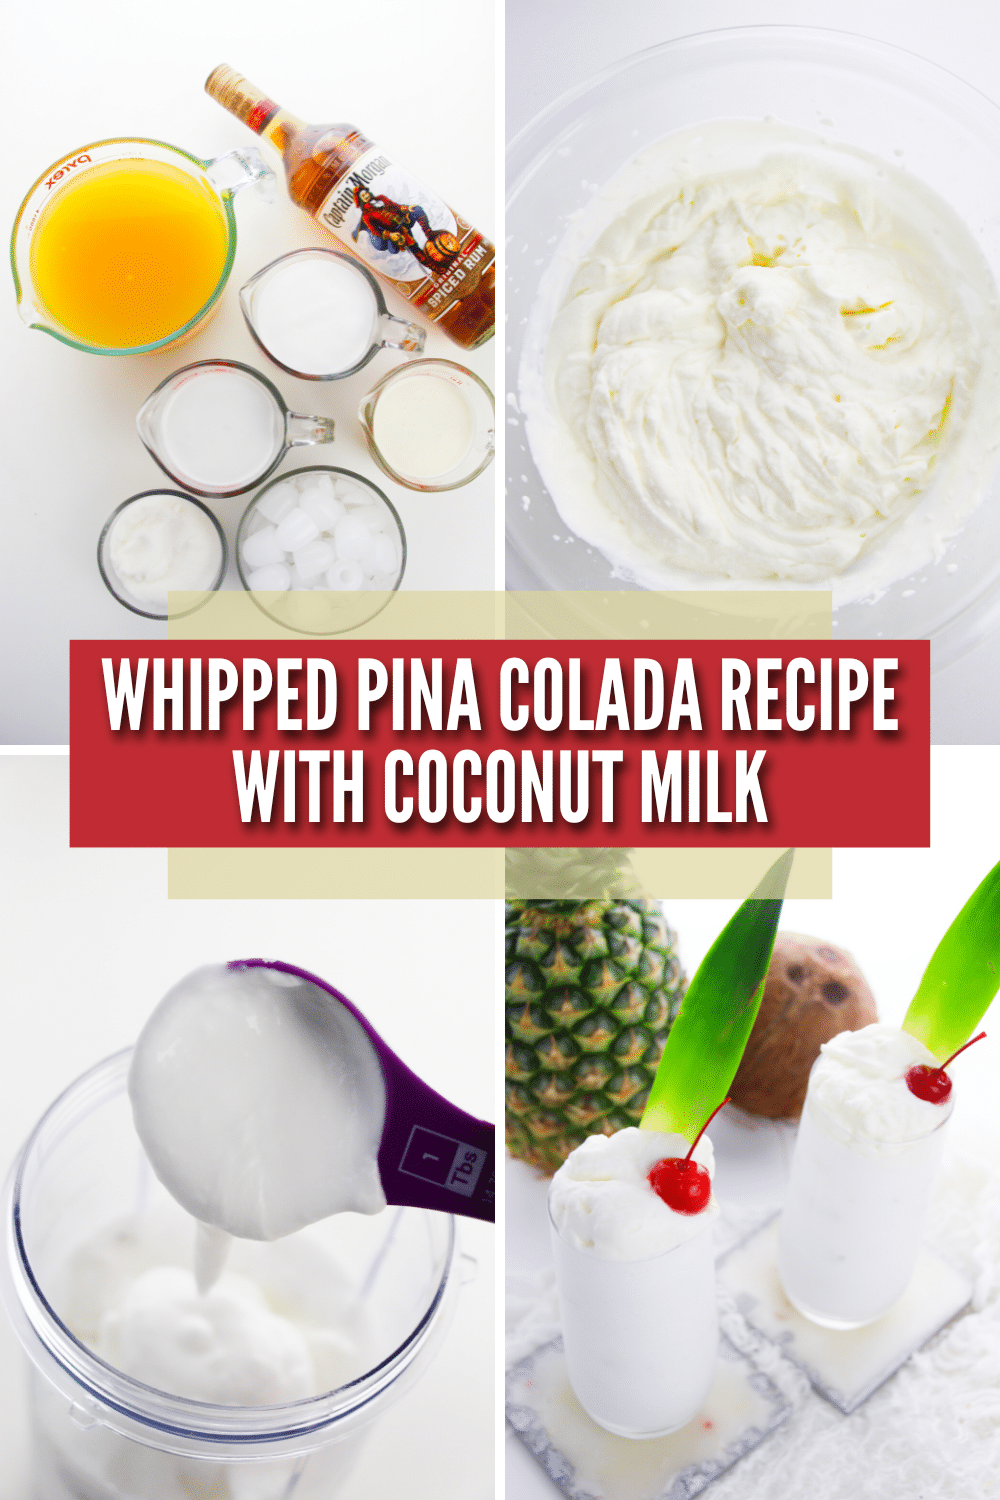 This Whipped Pina Colada Recipe with Coconut Milk is sweet, creamy, and bursting with coconut flavor. It's the perfect cocktail for summer. #pinacoladarecipewithcoconutmilk #pinacolada #pinacoladarecipe #pinacoladas #frozencocktail via @wondermomwannab